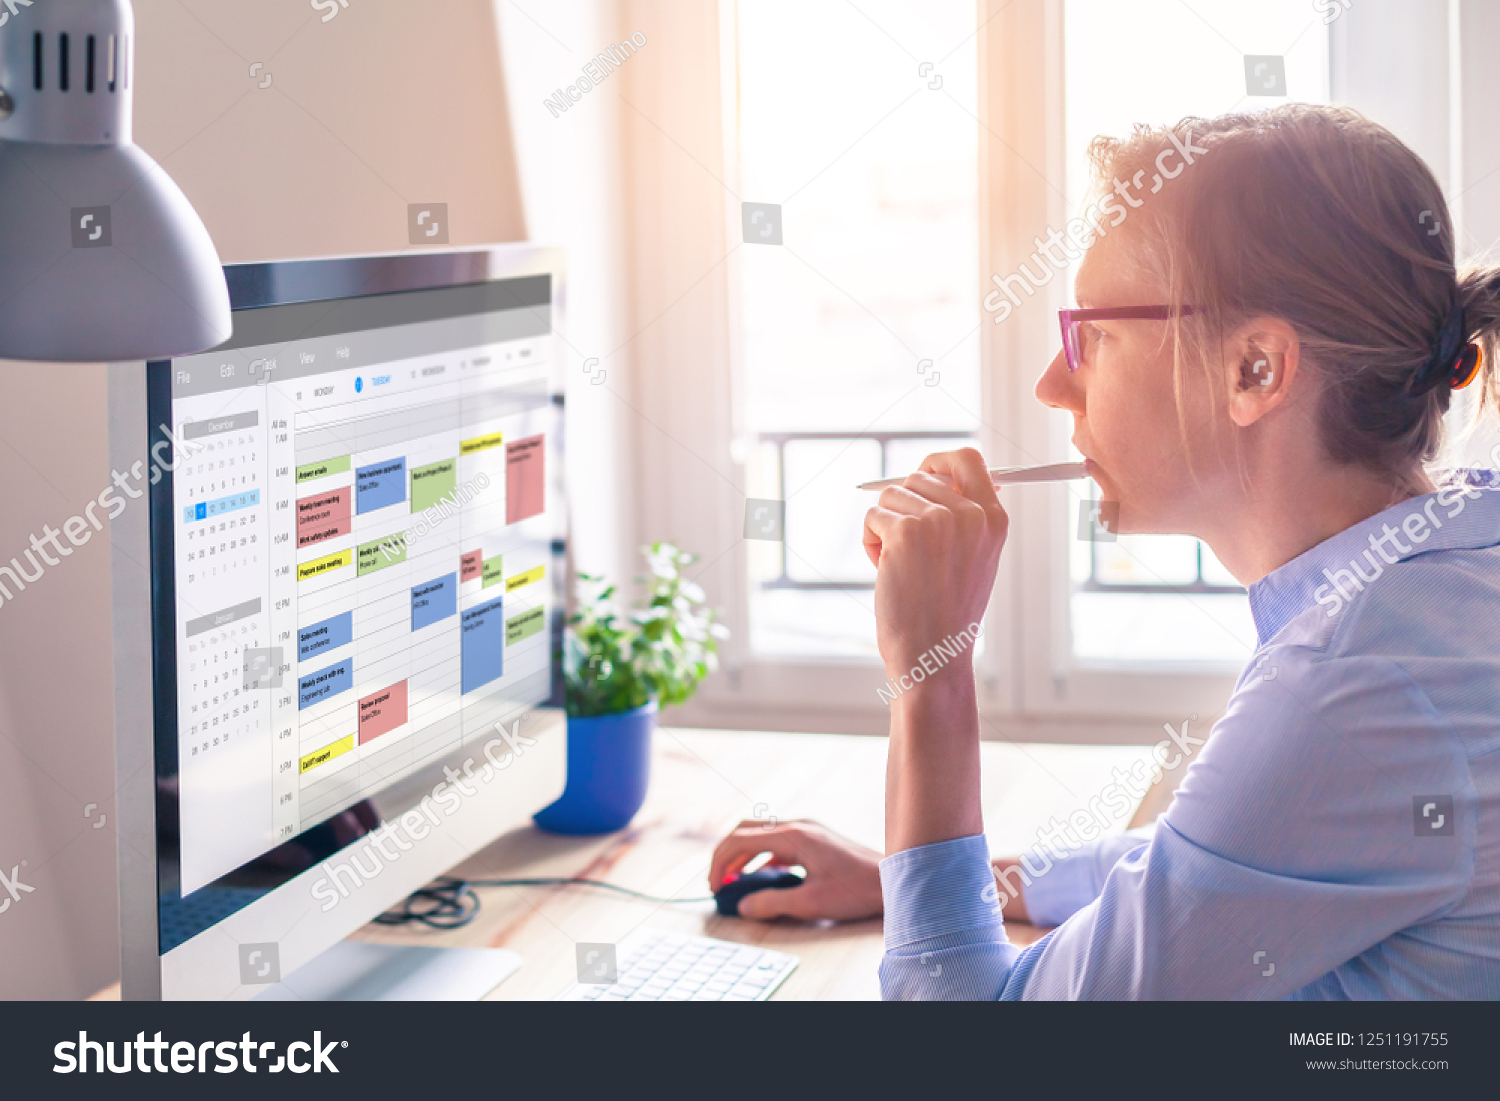 Person using calendar on computer to improve time management, plan appointments, events, tasks and meetings efficiently, improve productivity, organize week day and work hours, business woman, office #1251191755